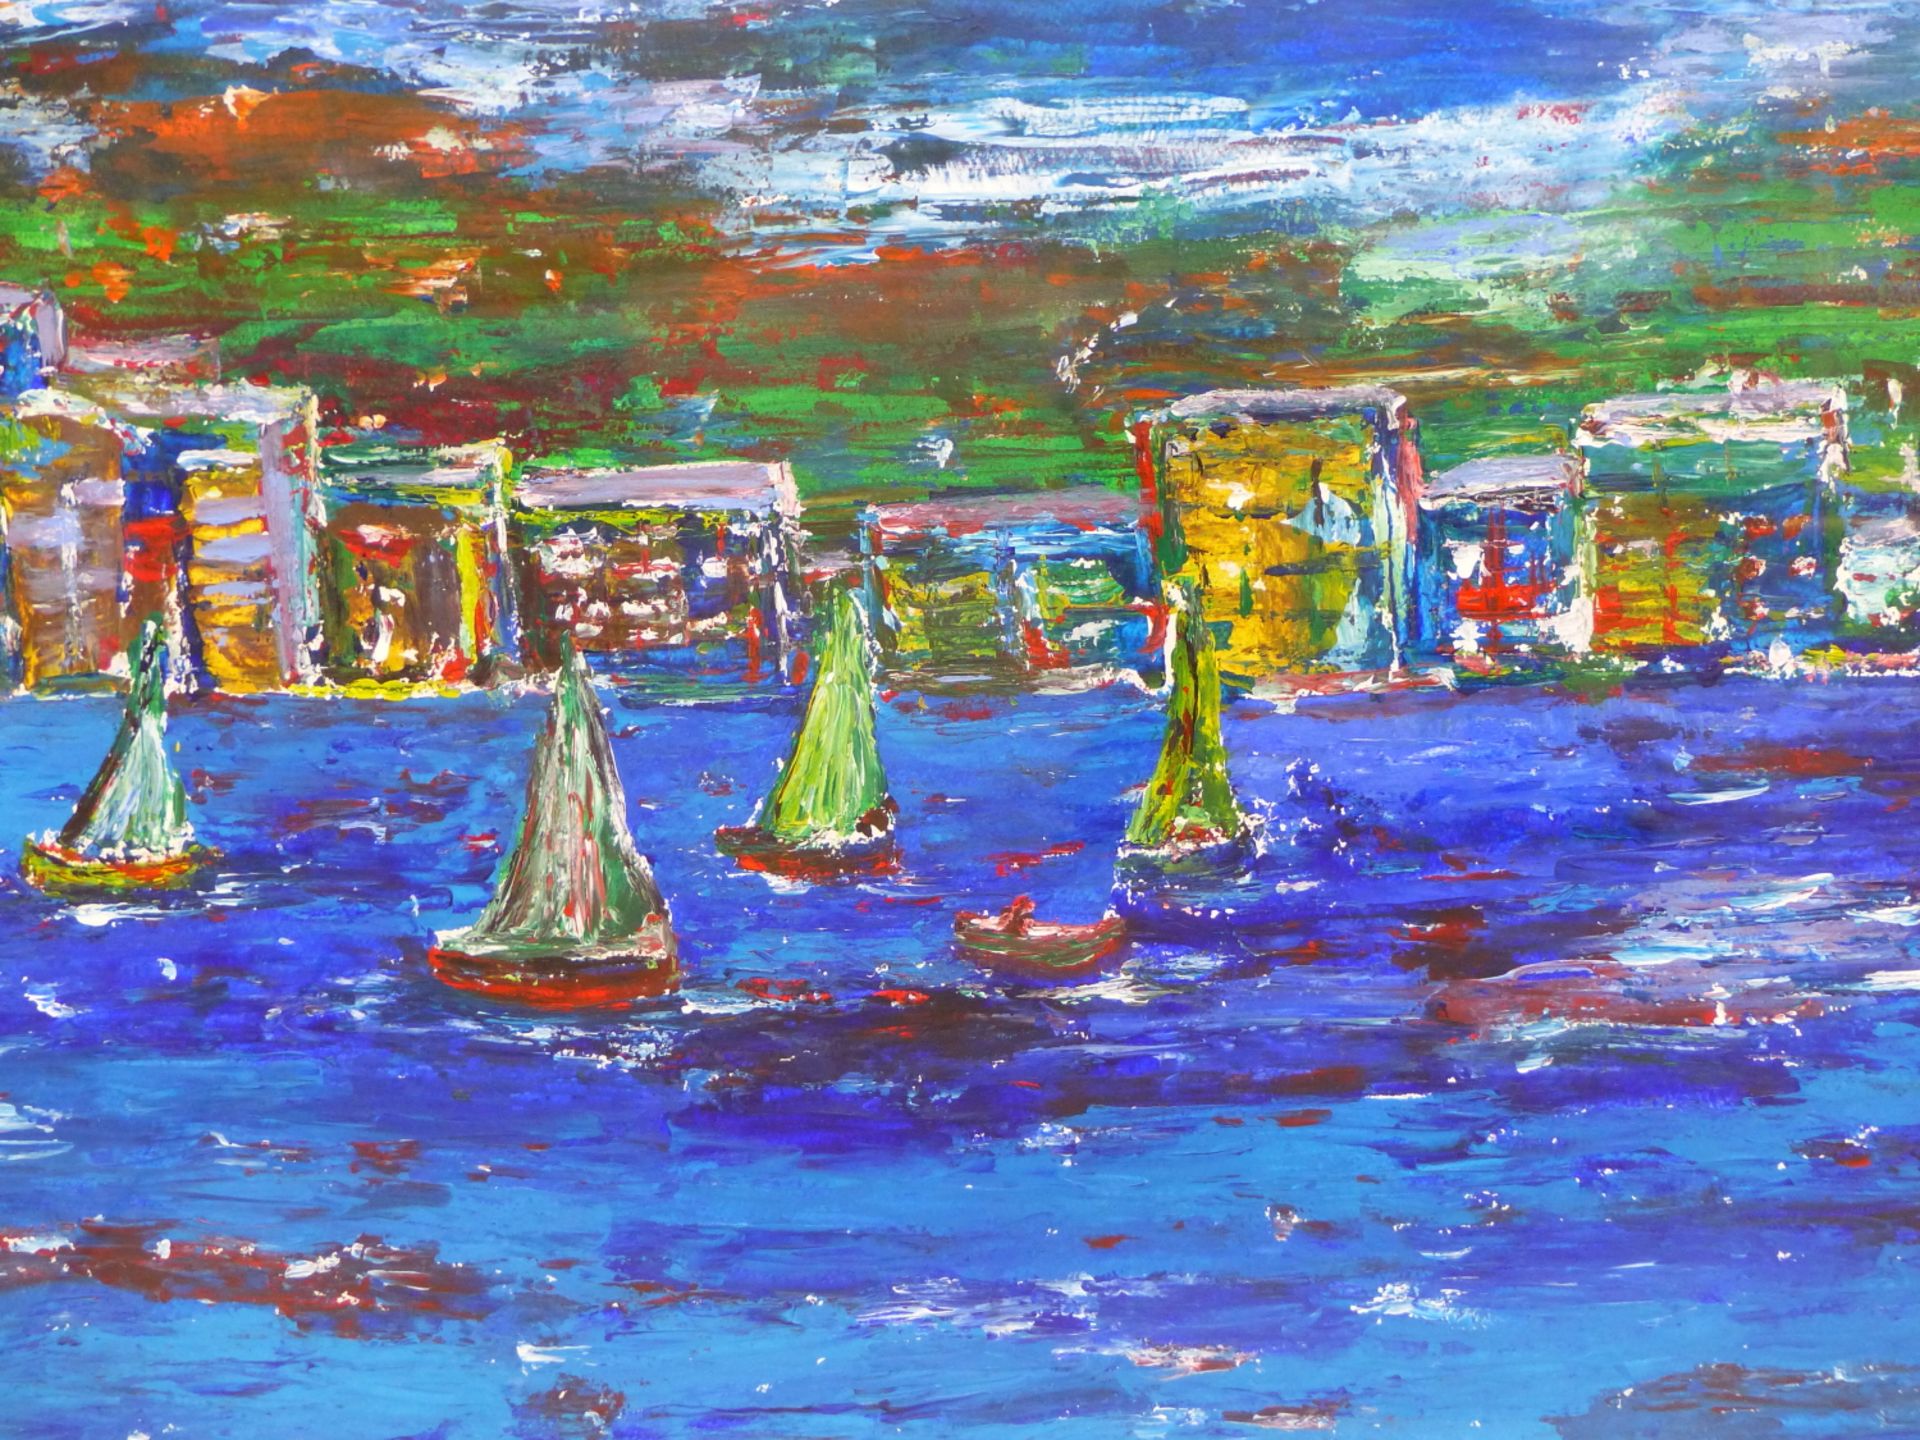 T FOX. (20TH/21ST CENTURY) ARR. BOATING BEFORE A COASTAL TOWN- ACRYLIC, SIGNED AND DATED LOWER RIGHT